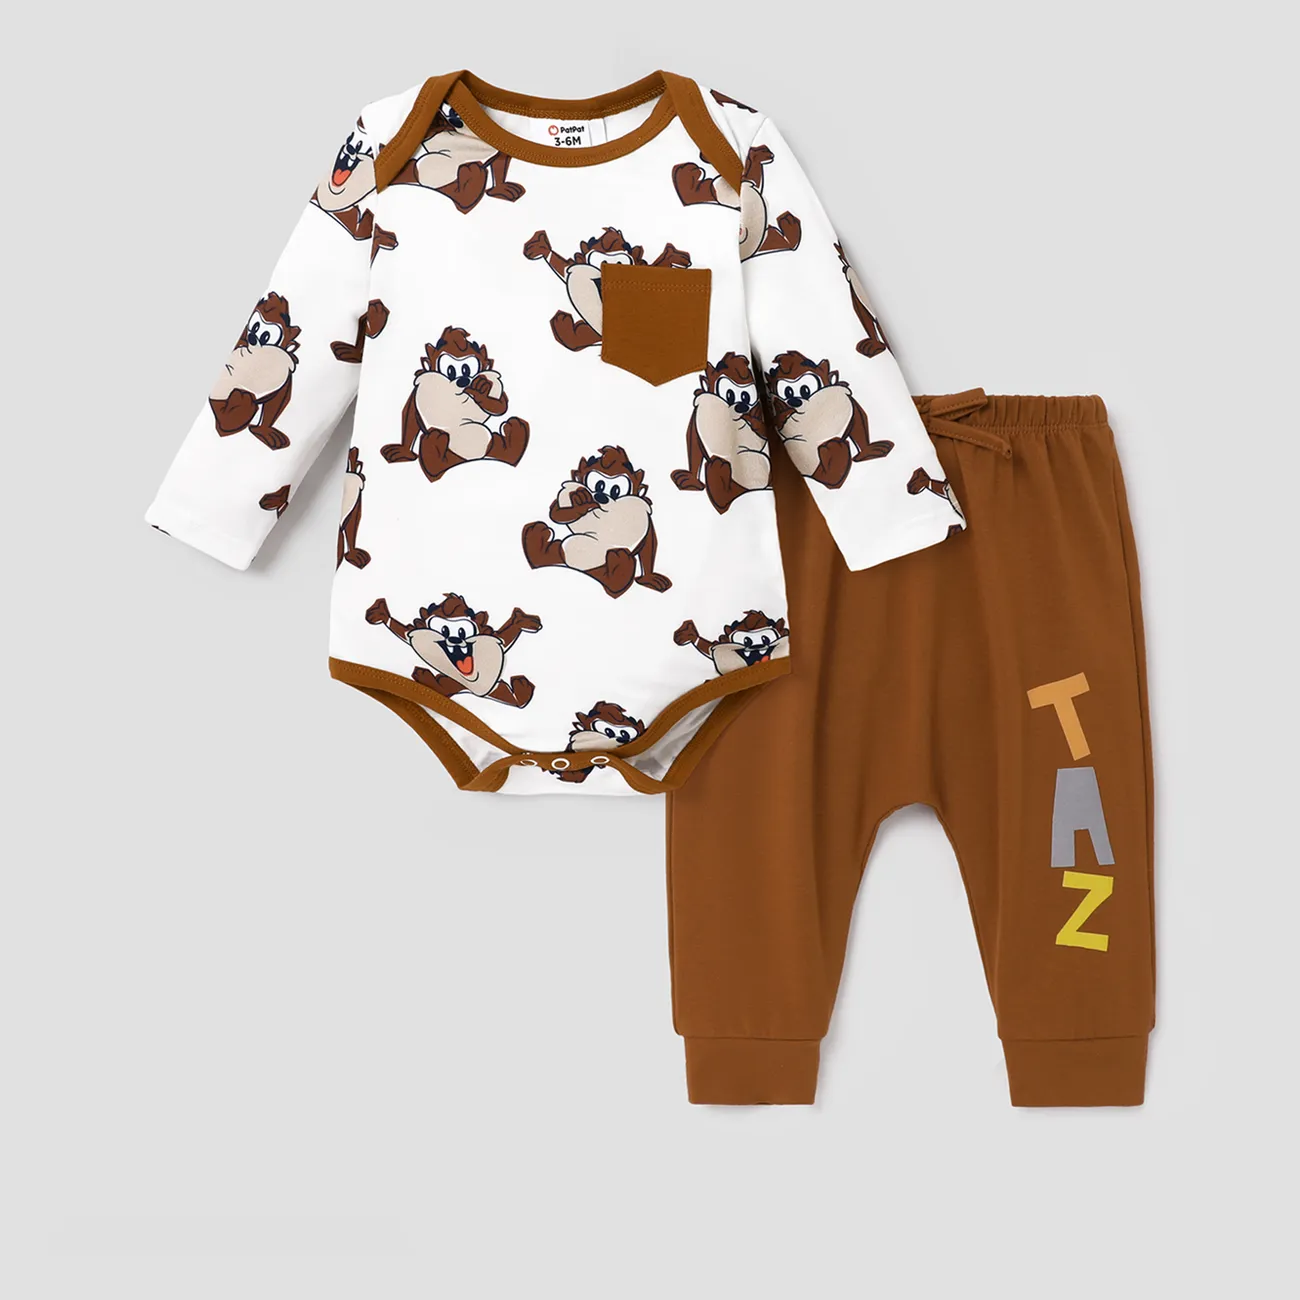 Looney Tunes Baby Boy/Girl Character Print Long-sleeve Bodysuit and Pant Sets Brown big image 1